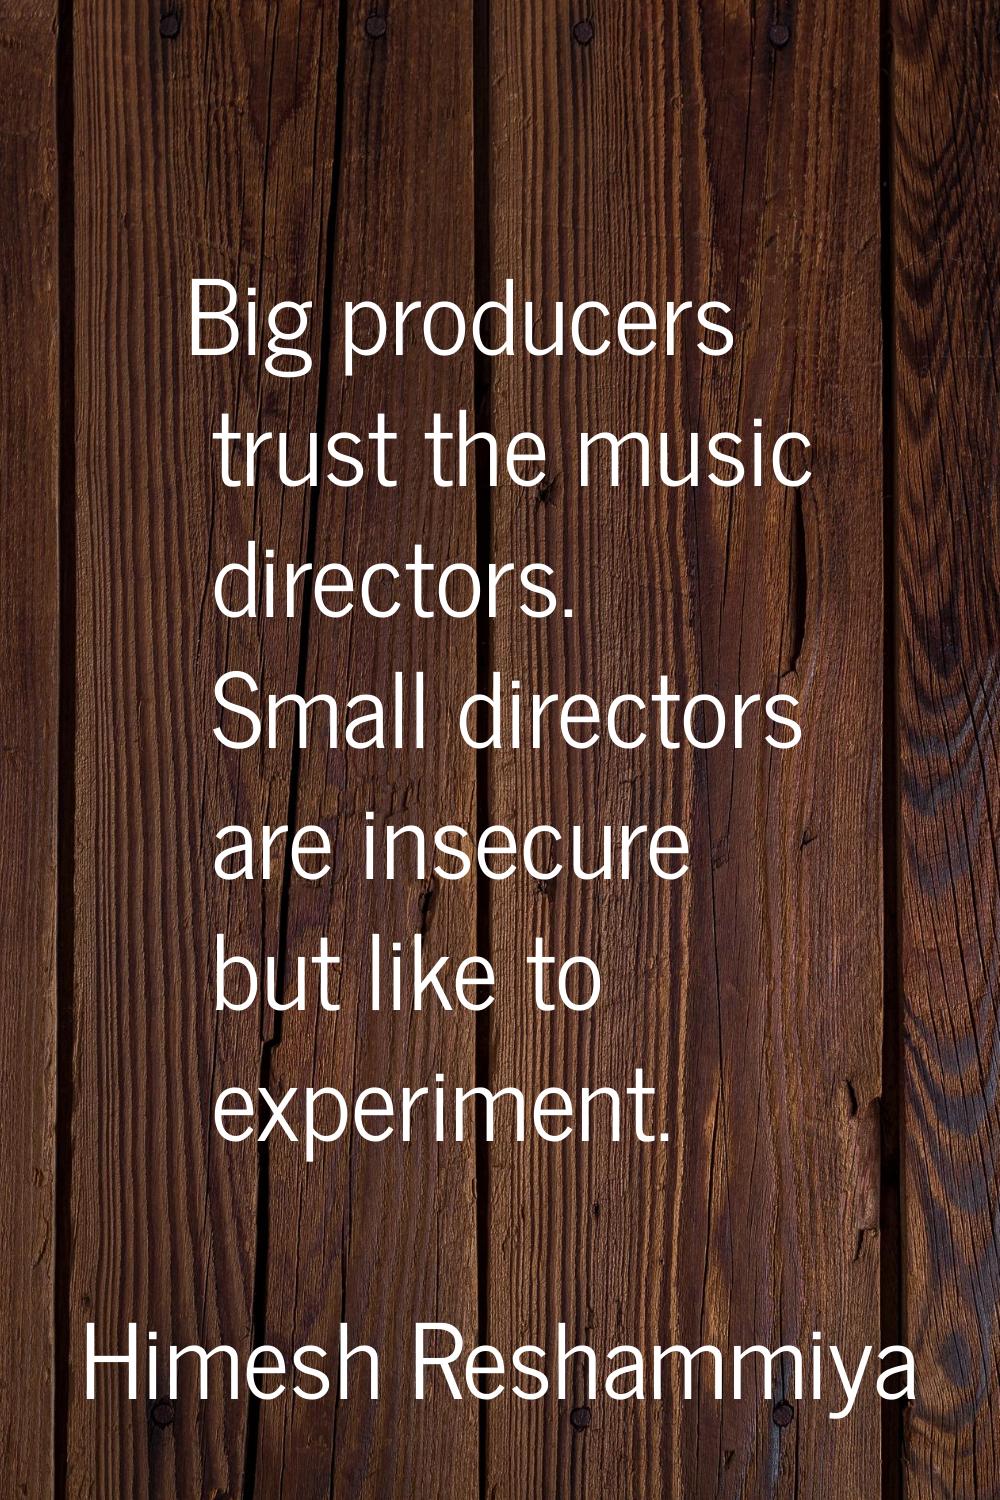 Big producers trust the music directors. Small directors are insecure but like to experiment.